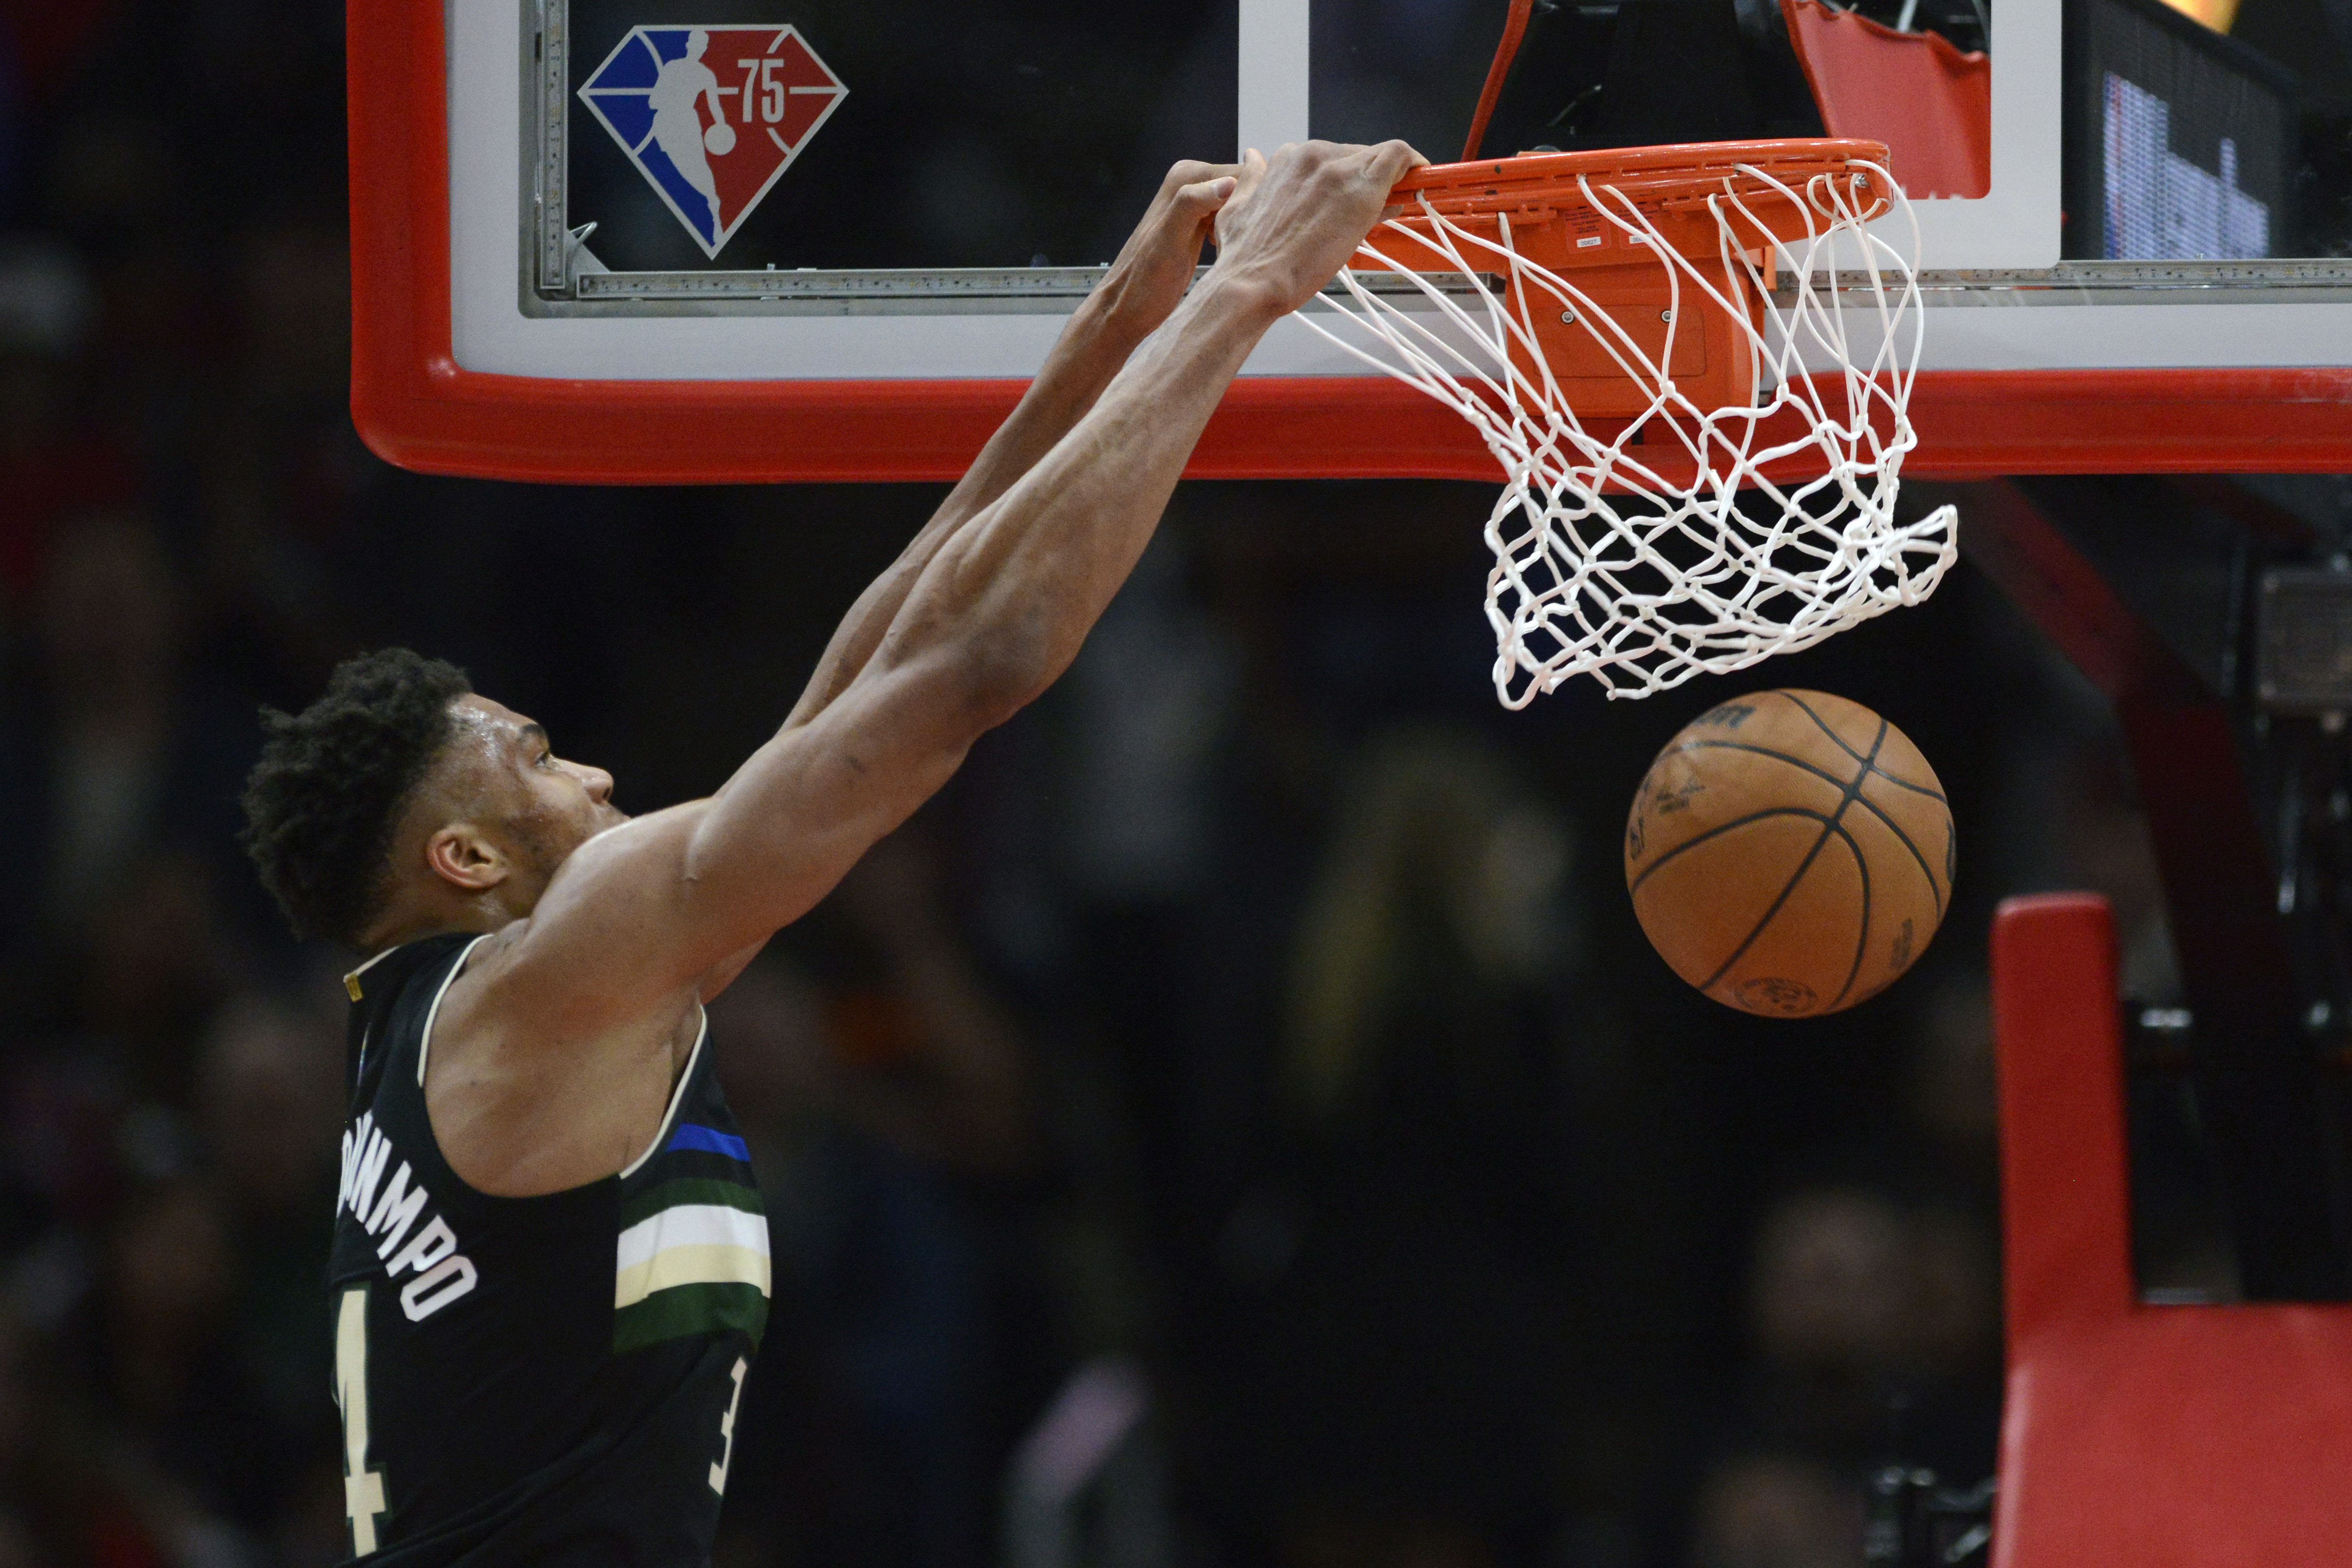 Bulls' Jones Jr. on his dunk on Giannis: That's not even close to